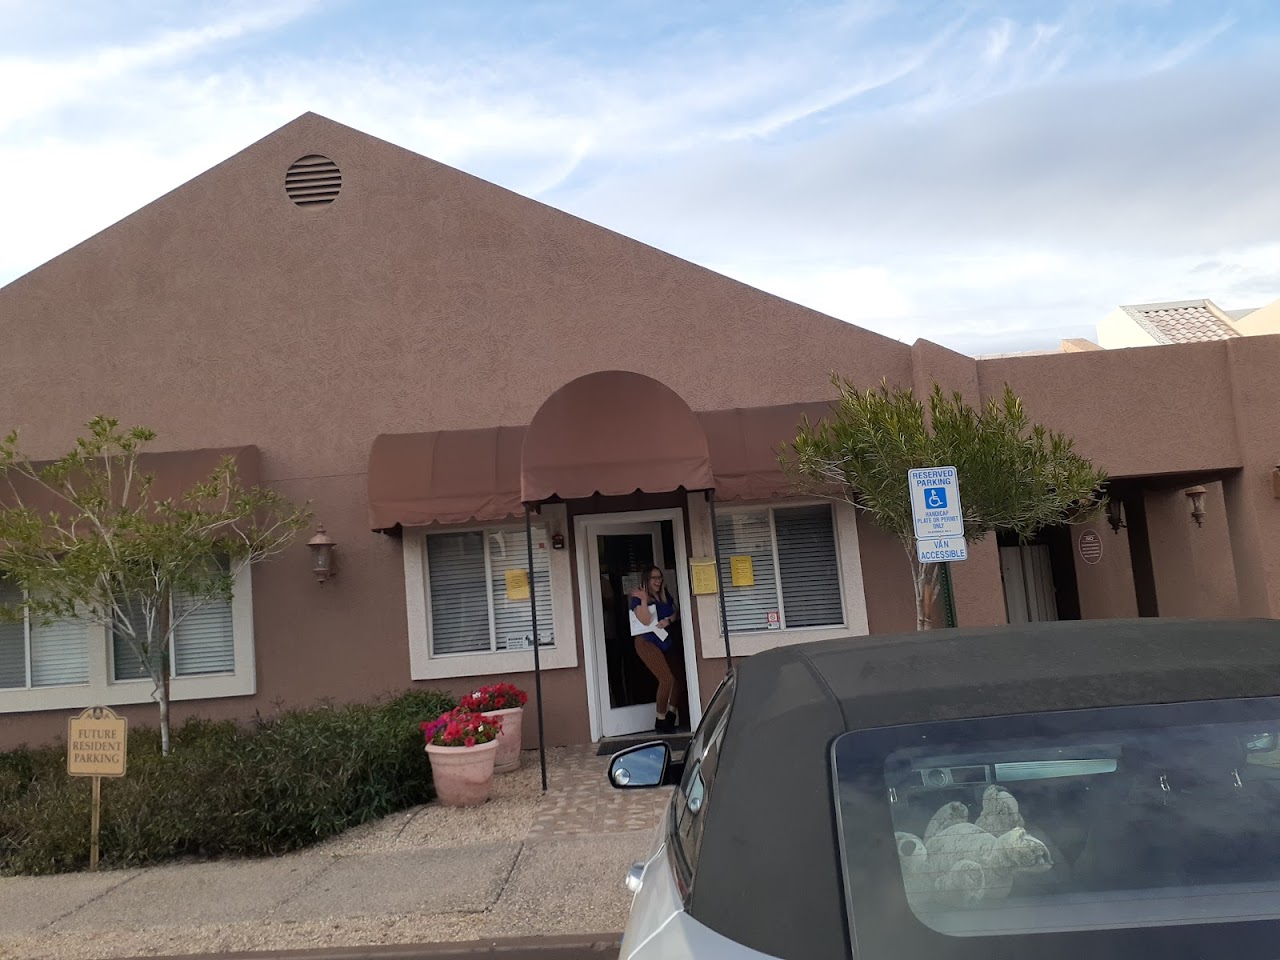 Photo of GALLERIA PHASE I. Affordable housing located at 10654 N 60TH AVE GLENDALE, AZ 85304